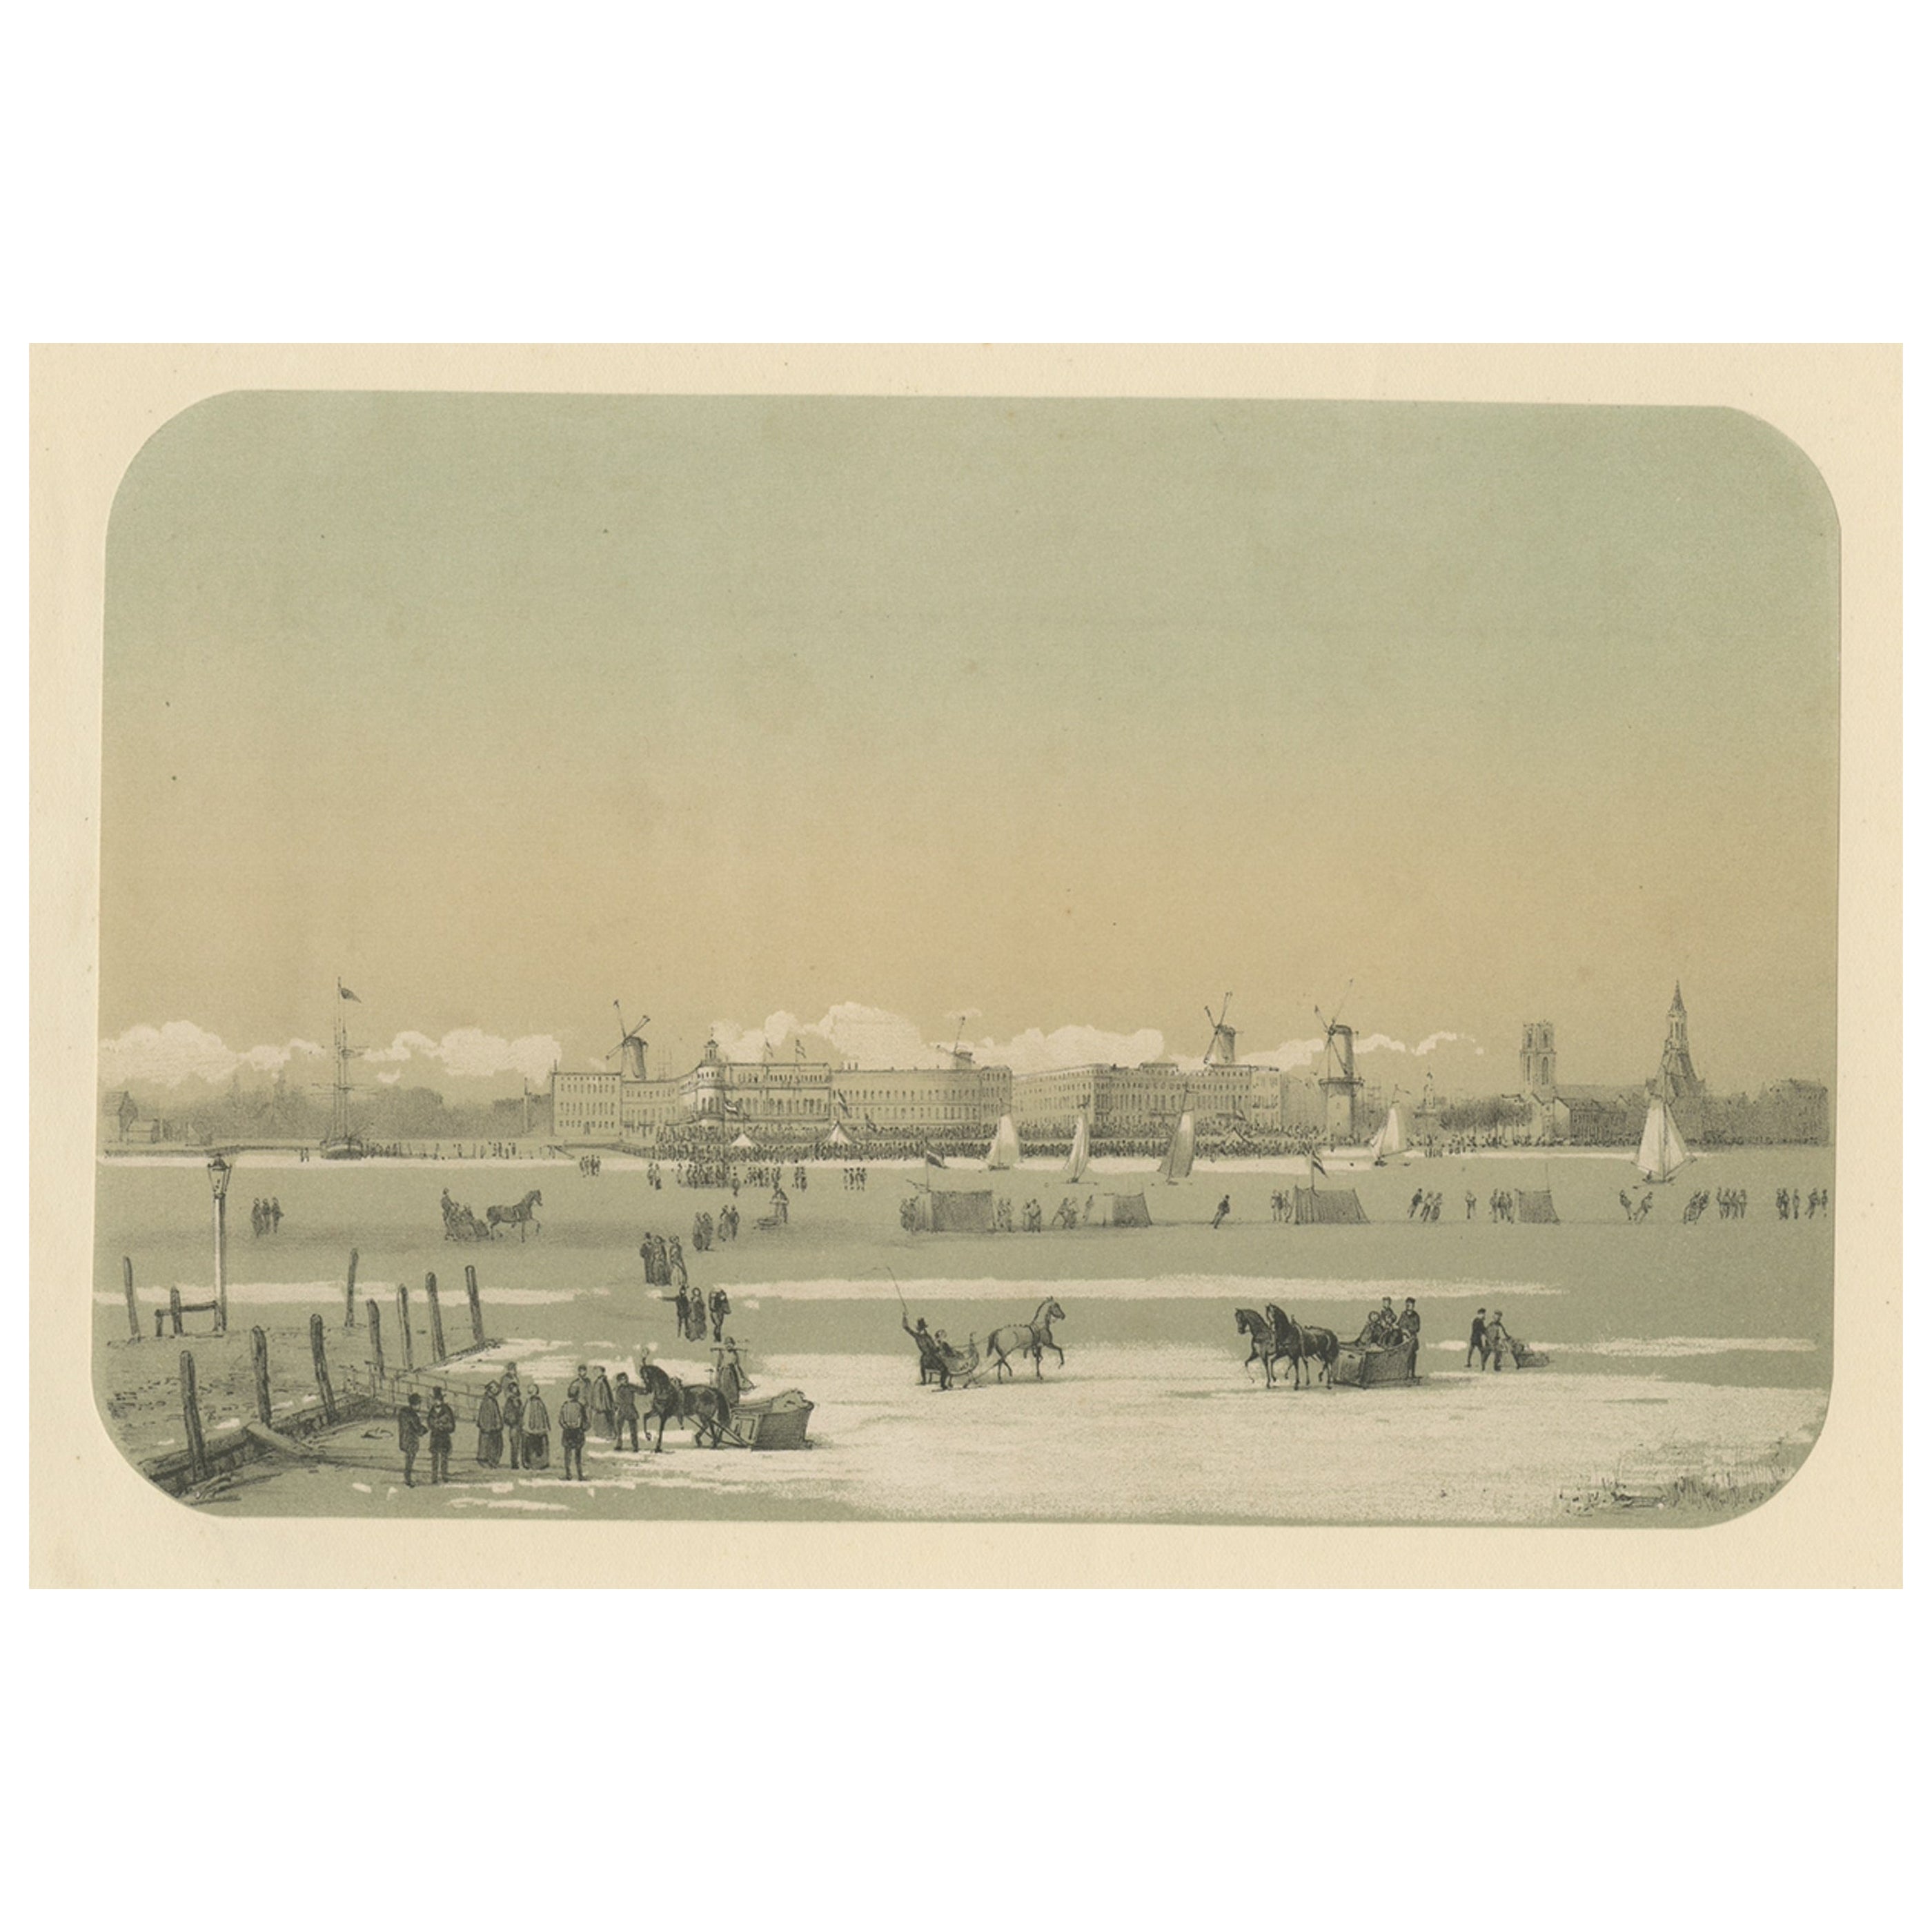 Ice Skating Activities Near Katendrecht and Rotterdam, The Netherlands, 1855 For Sale